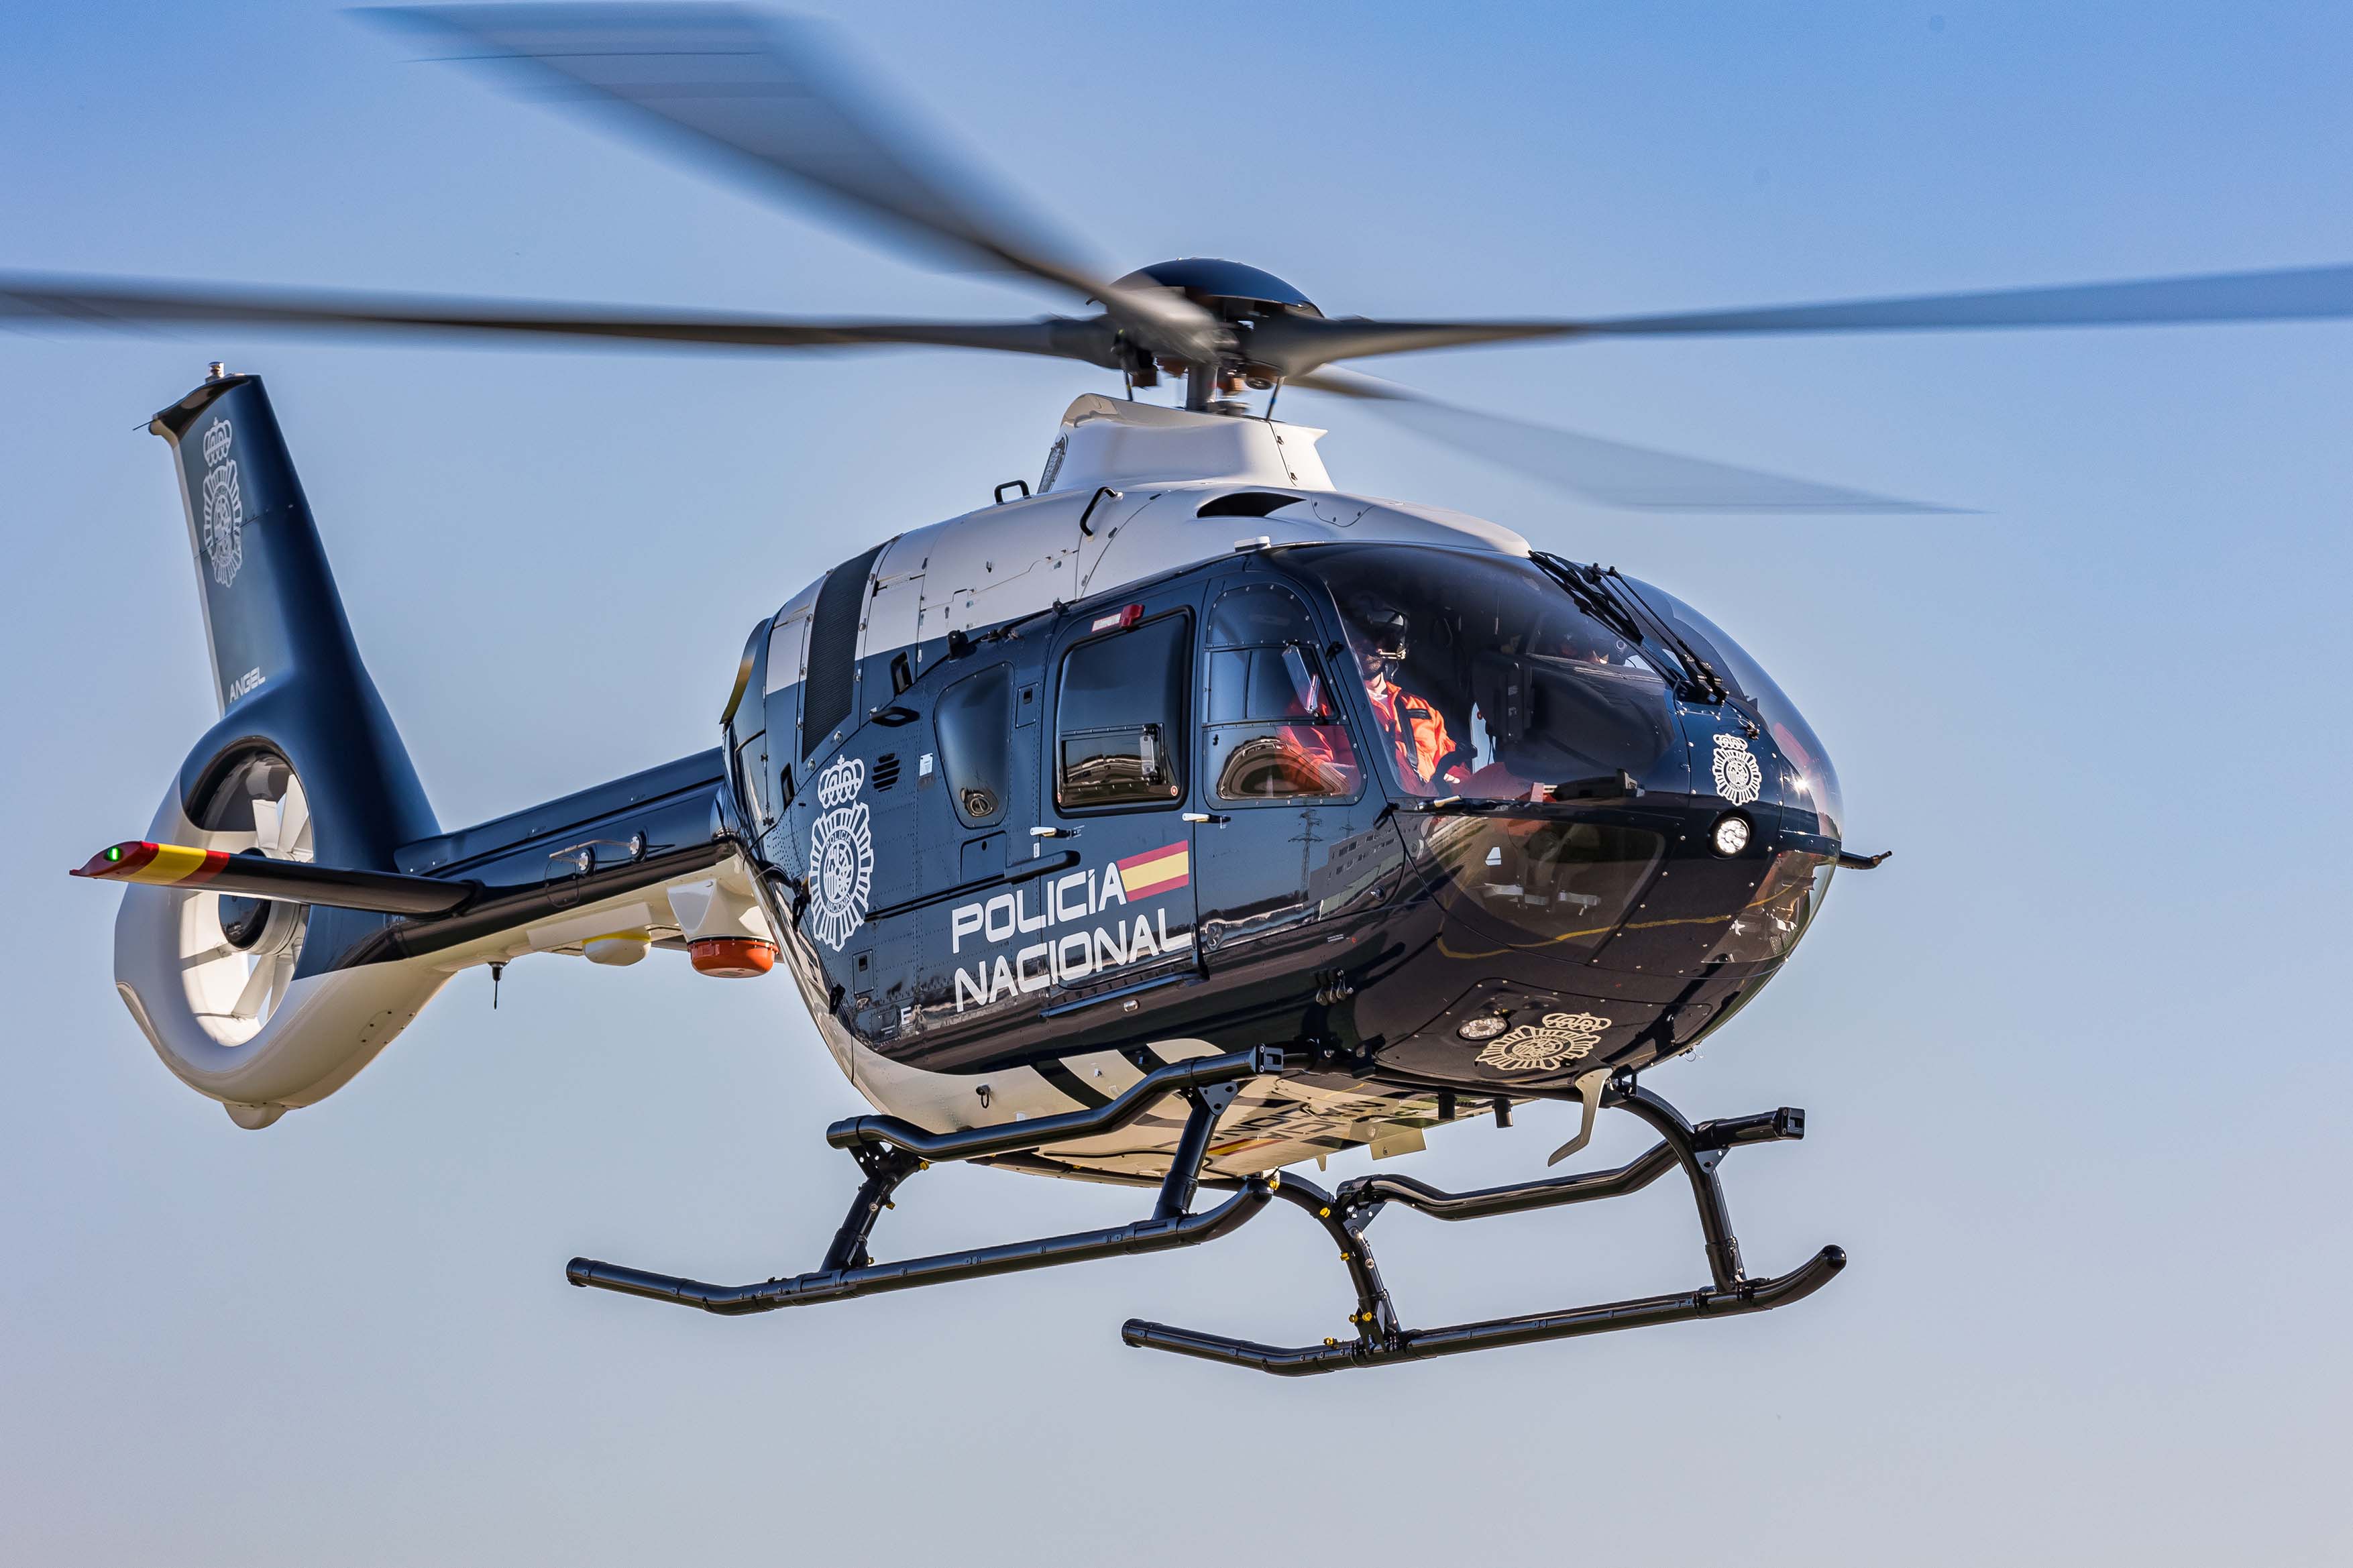 Airbus delivers first two H135s to Spain’s Guardia Civil